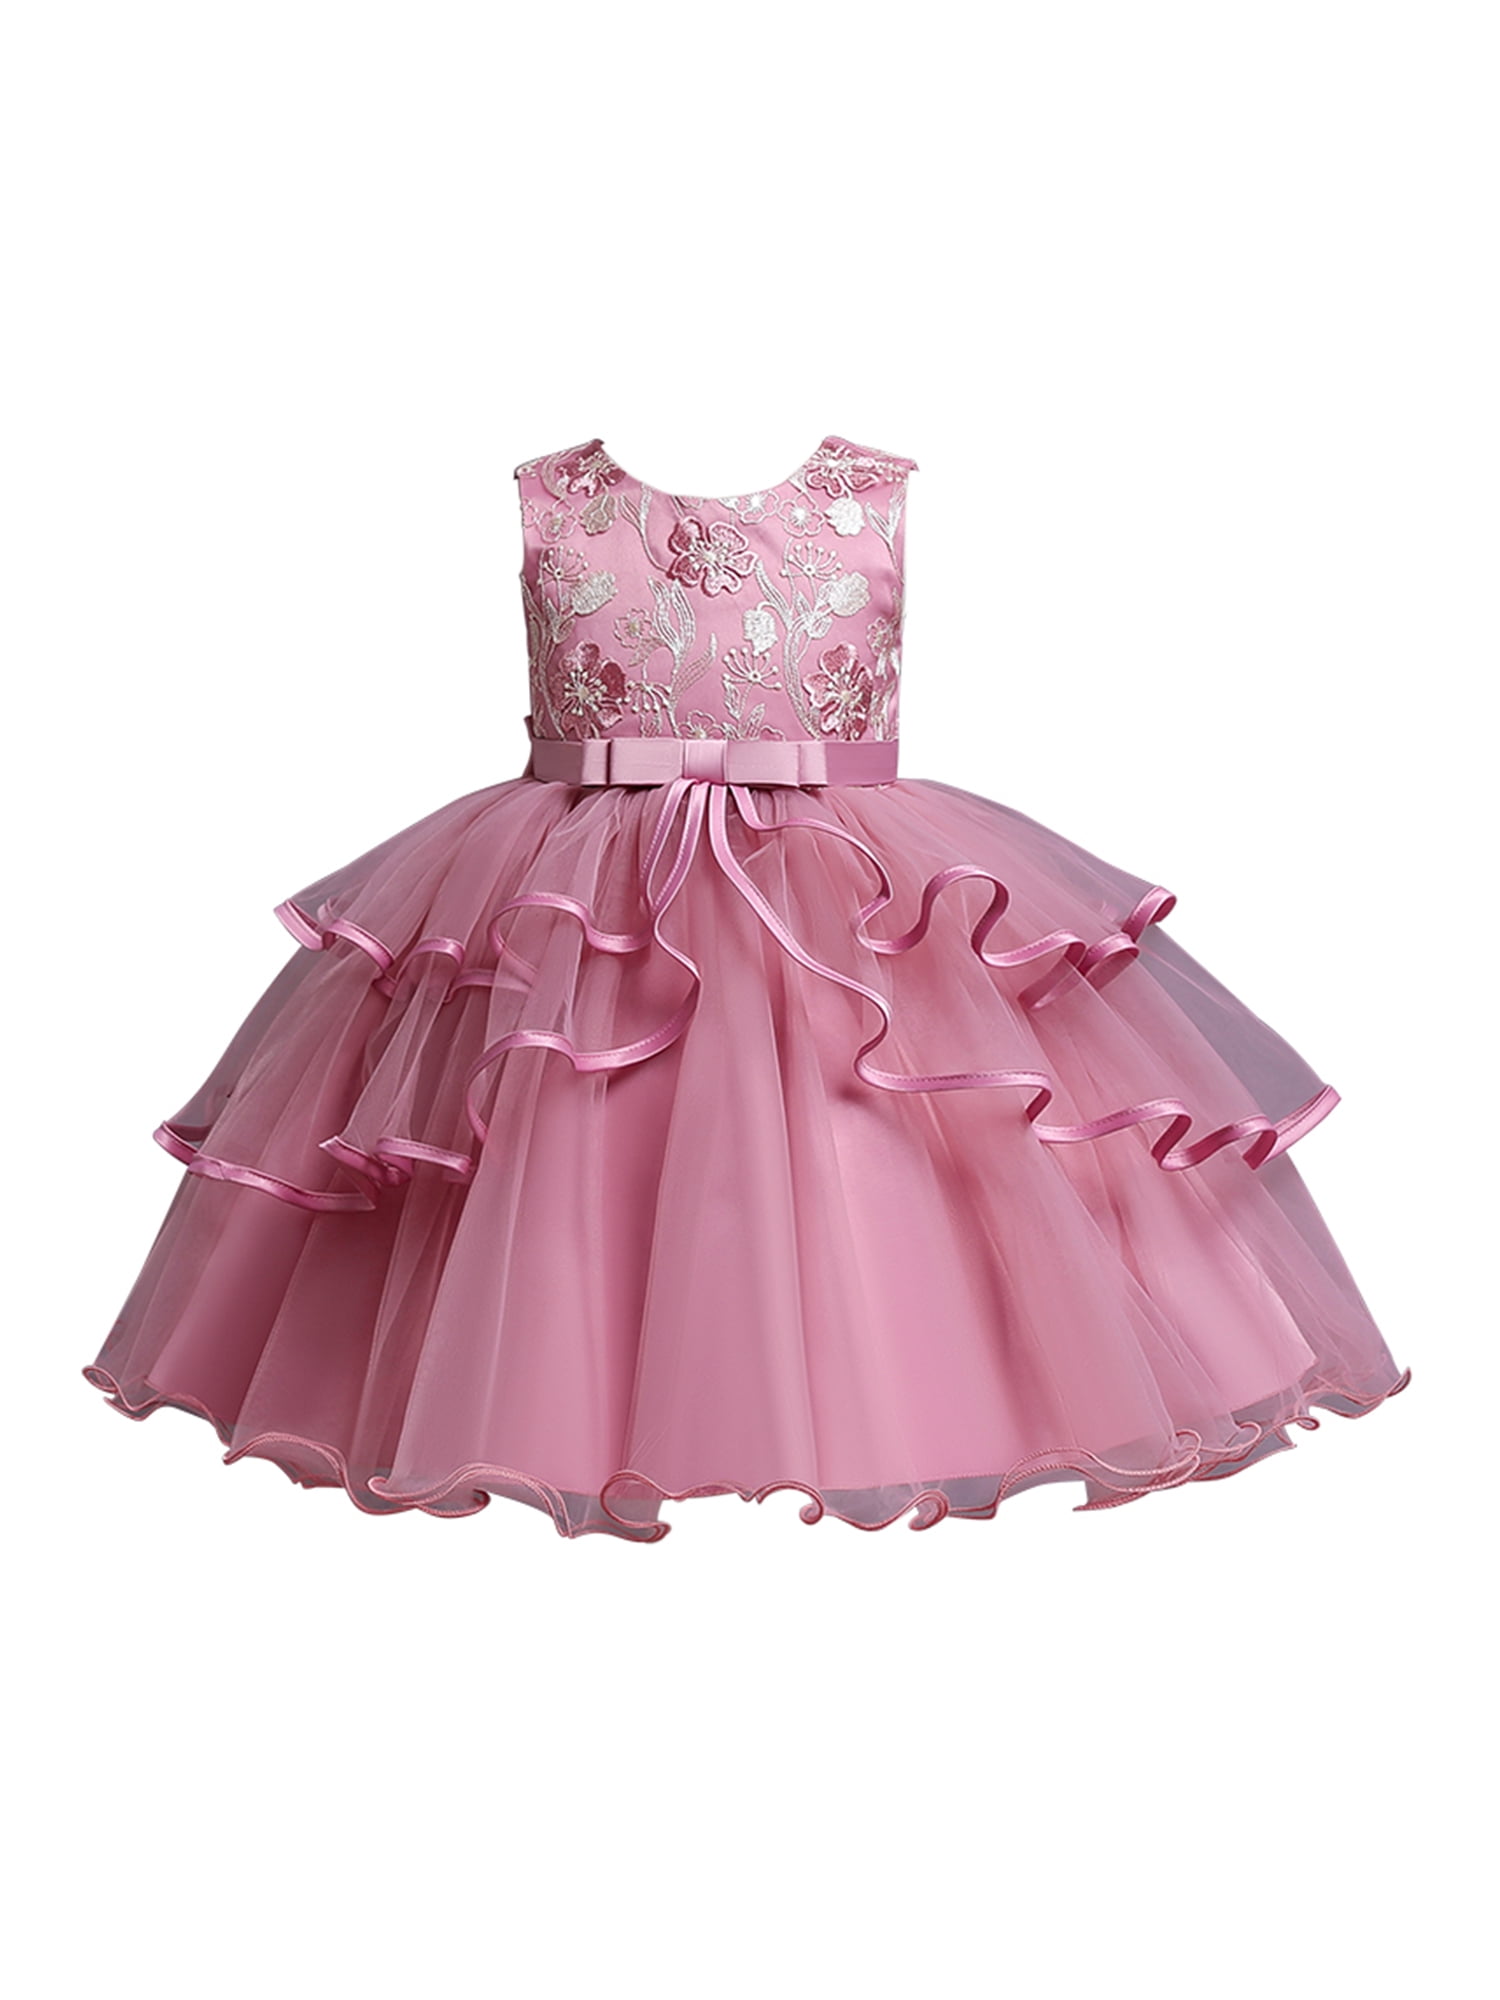 Fancy Kids Girls Lace Princess Tutu Dress Prom Party Bridesmaid Christmas Gown 